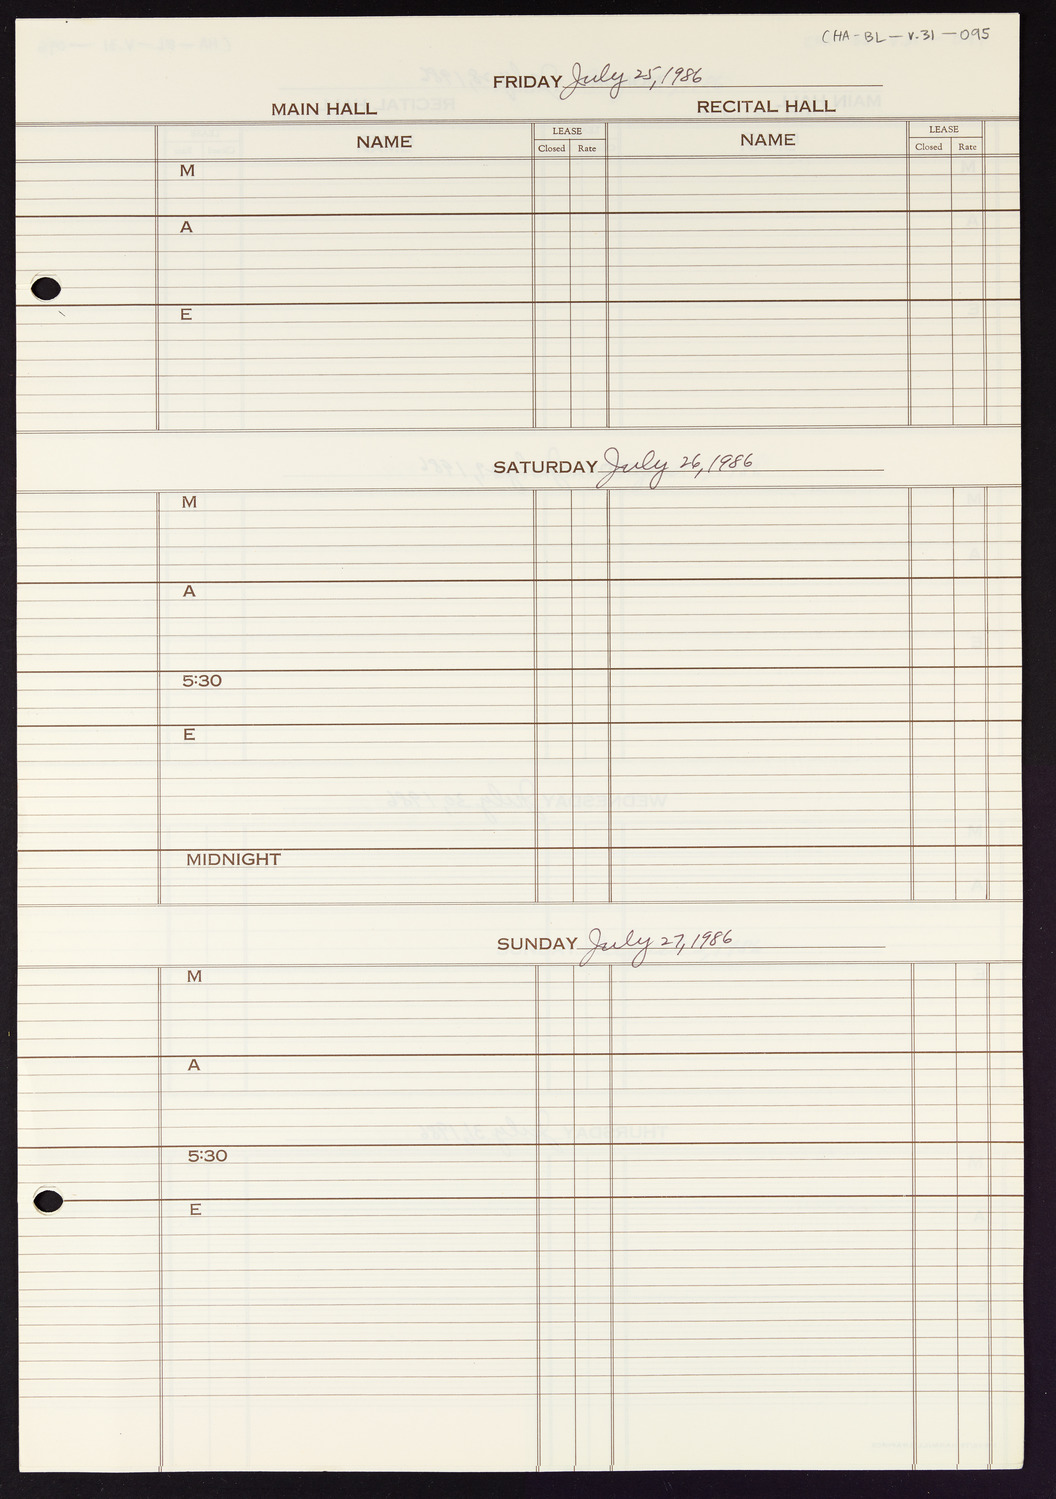 Carnegie Hall Booking Ledger, volume 31, page 95